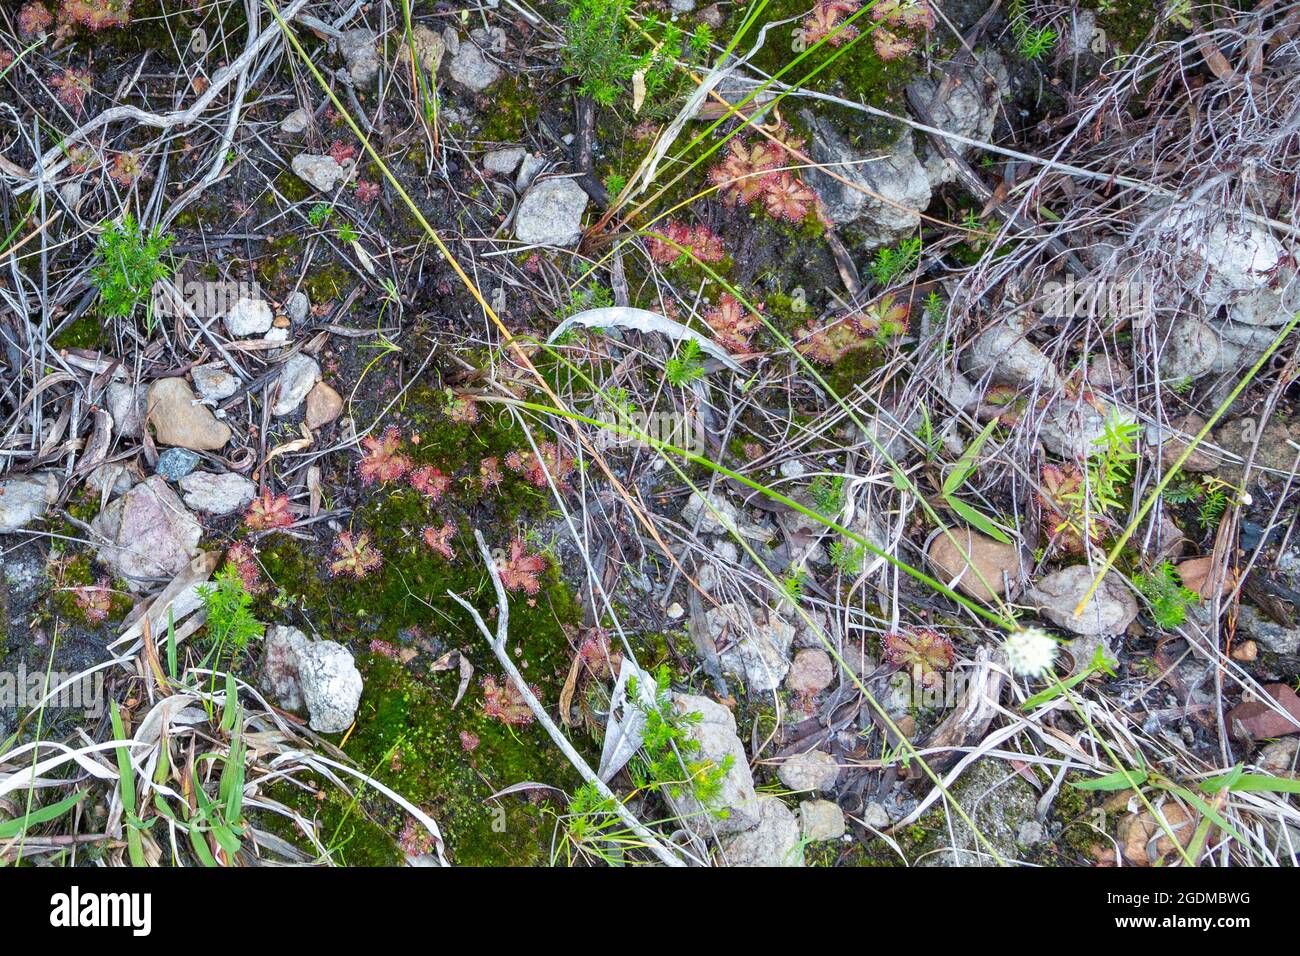 Group of Drosera trineriva taken in natural habitat close to Tulbagh in the Western Cape of South Africa Stock Photo